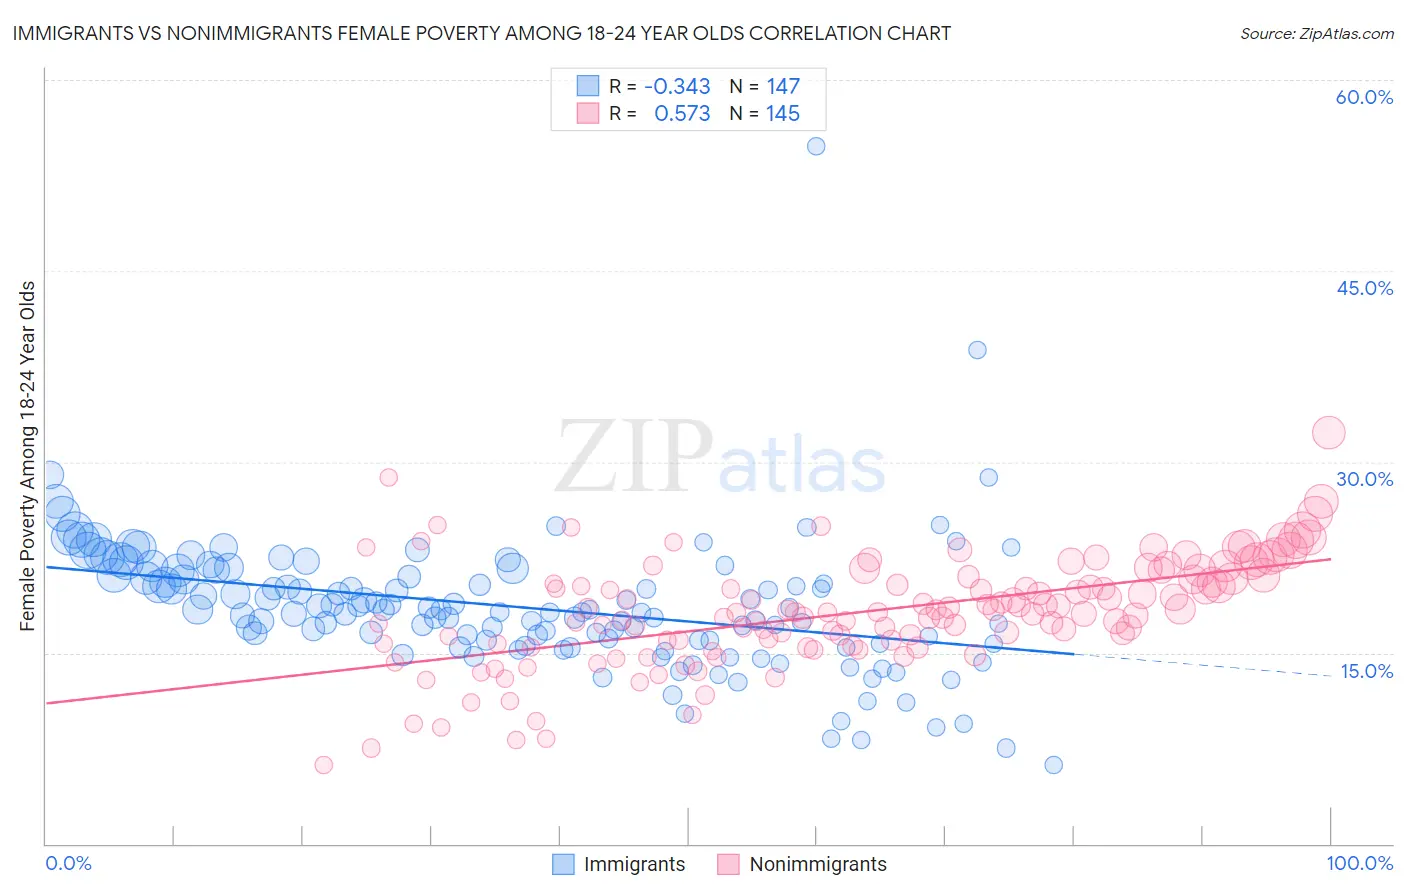 Immigrants vs Nonimmigrants Female Poverty Among 18-24 Year Olds